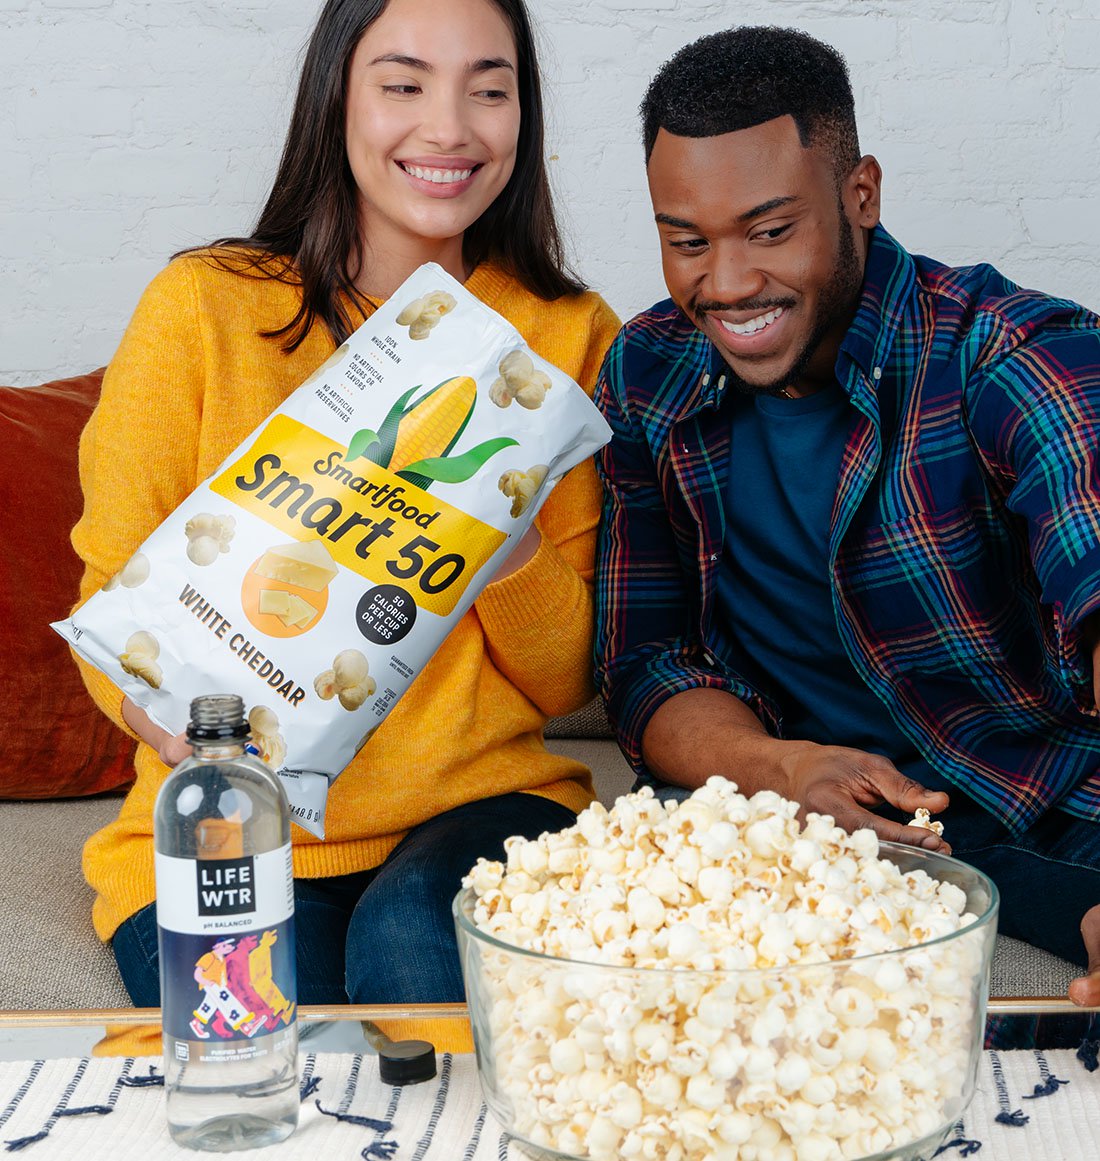 A couple shares popcorn during movie night